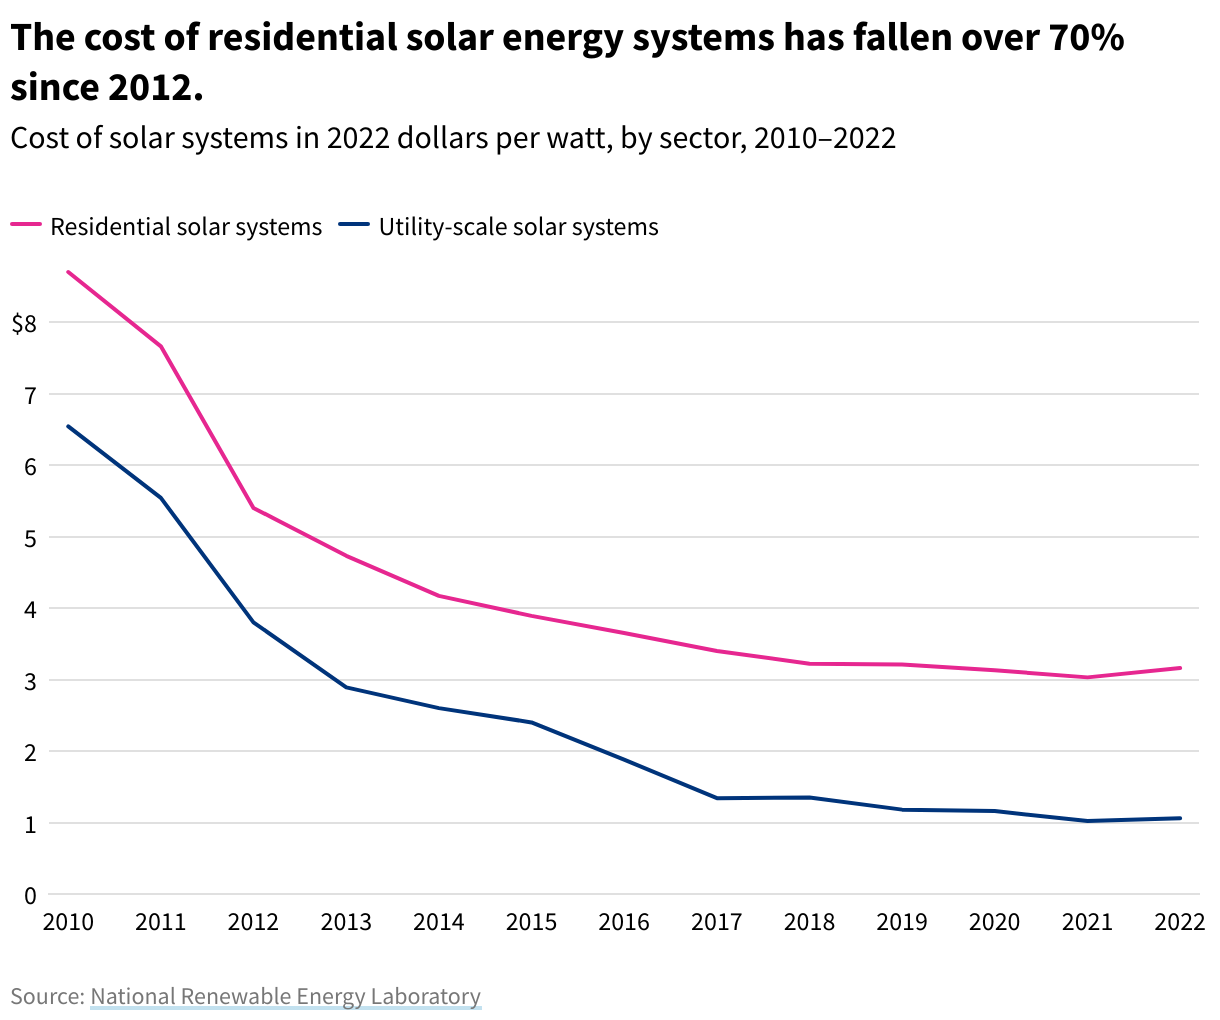 Two lines on a line chart. One shows residential solar system costs dropping from $8.7 in 2010 to $3.22 in 2018 and largely leveling out from there. Other line shows utility-scale solar system costs dropping from $6.54 in 2010 to $1.35 in 2018 and continuing to drop to $1.06 in 2022.